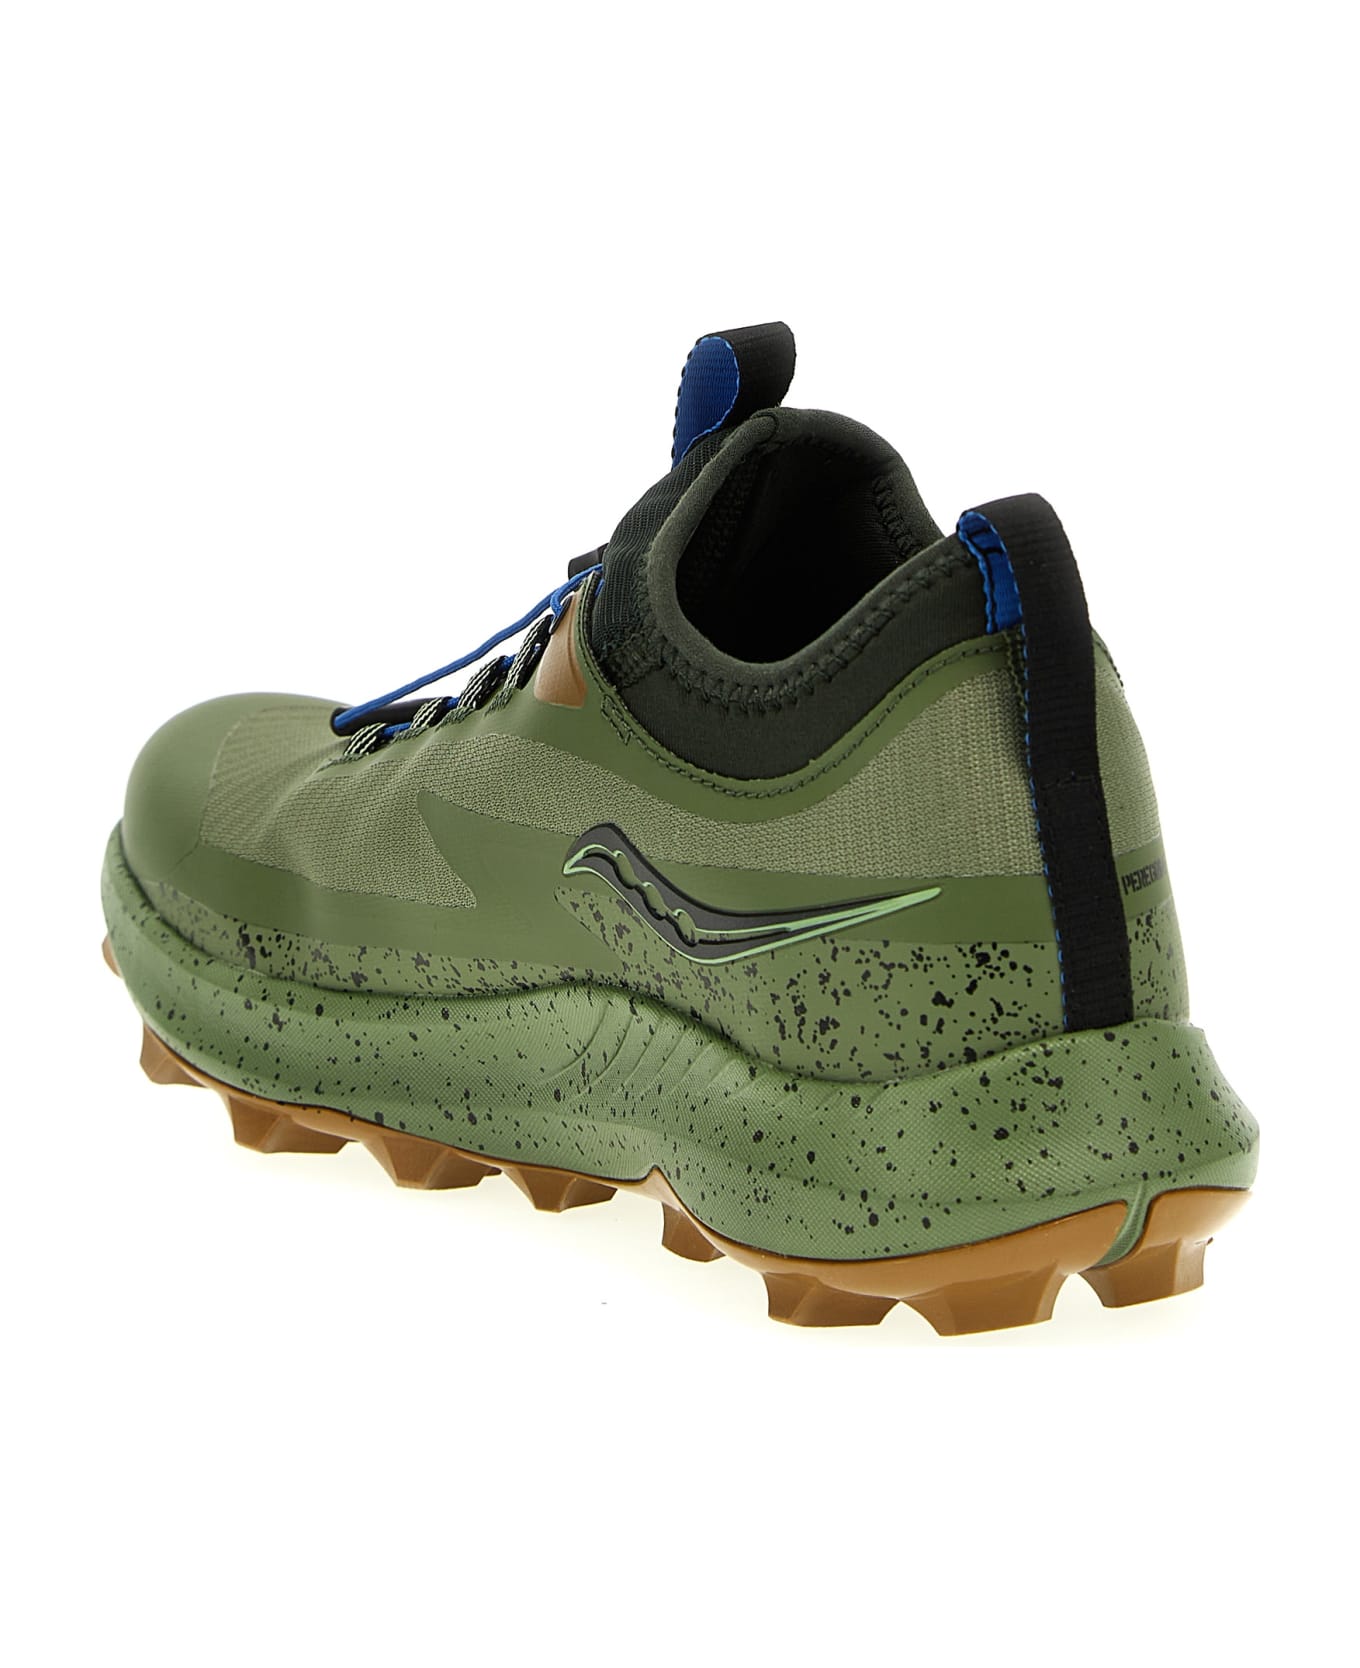 Saucony 'peregrine 13 St' Sneakers Sneakers - GLADE スニーカー